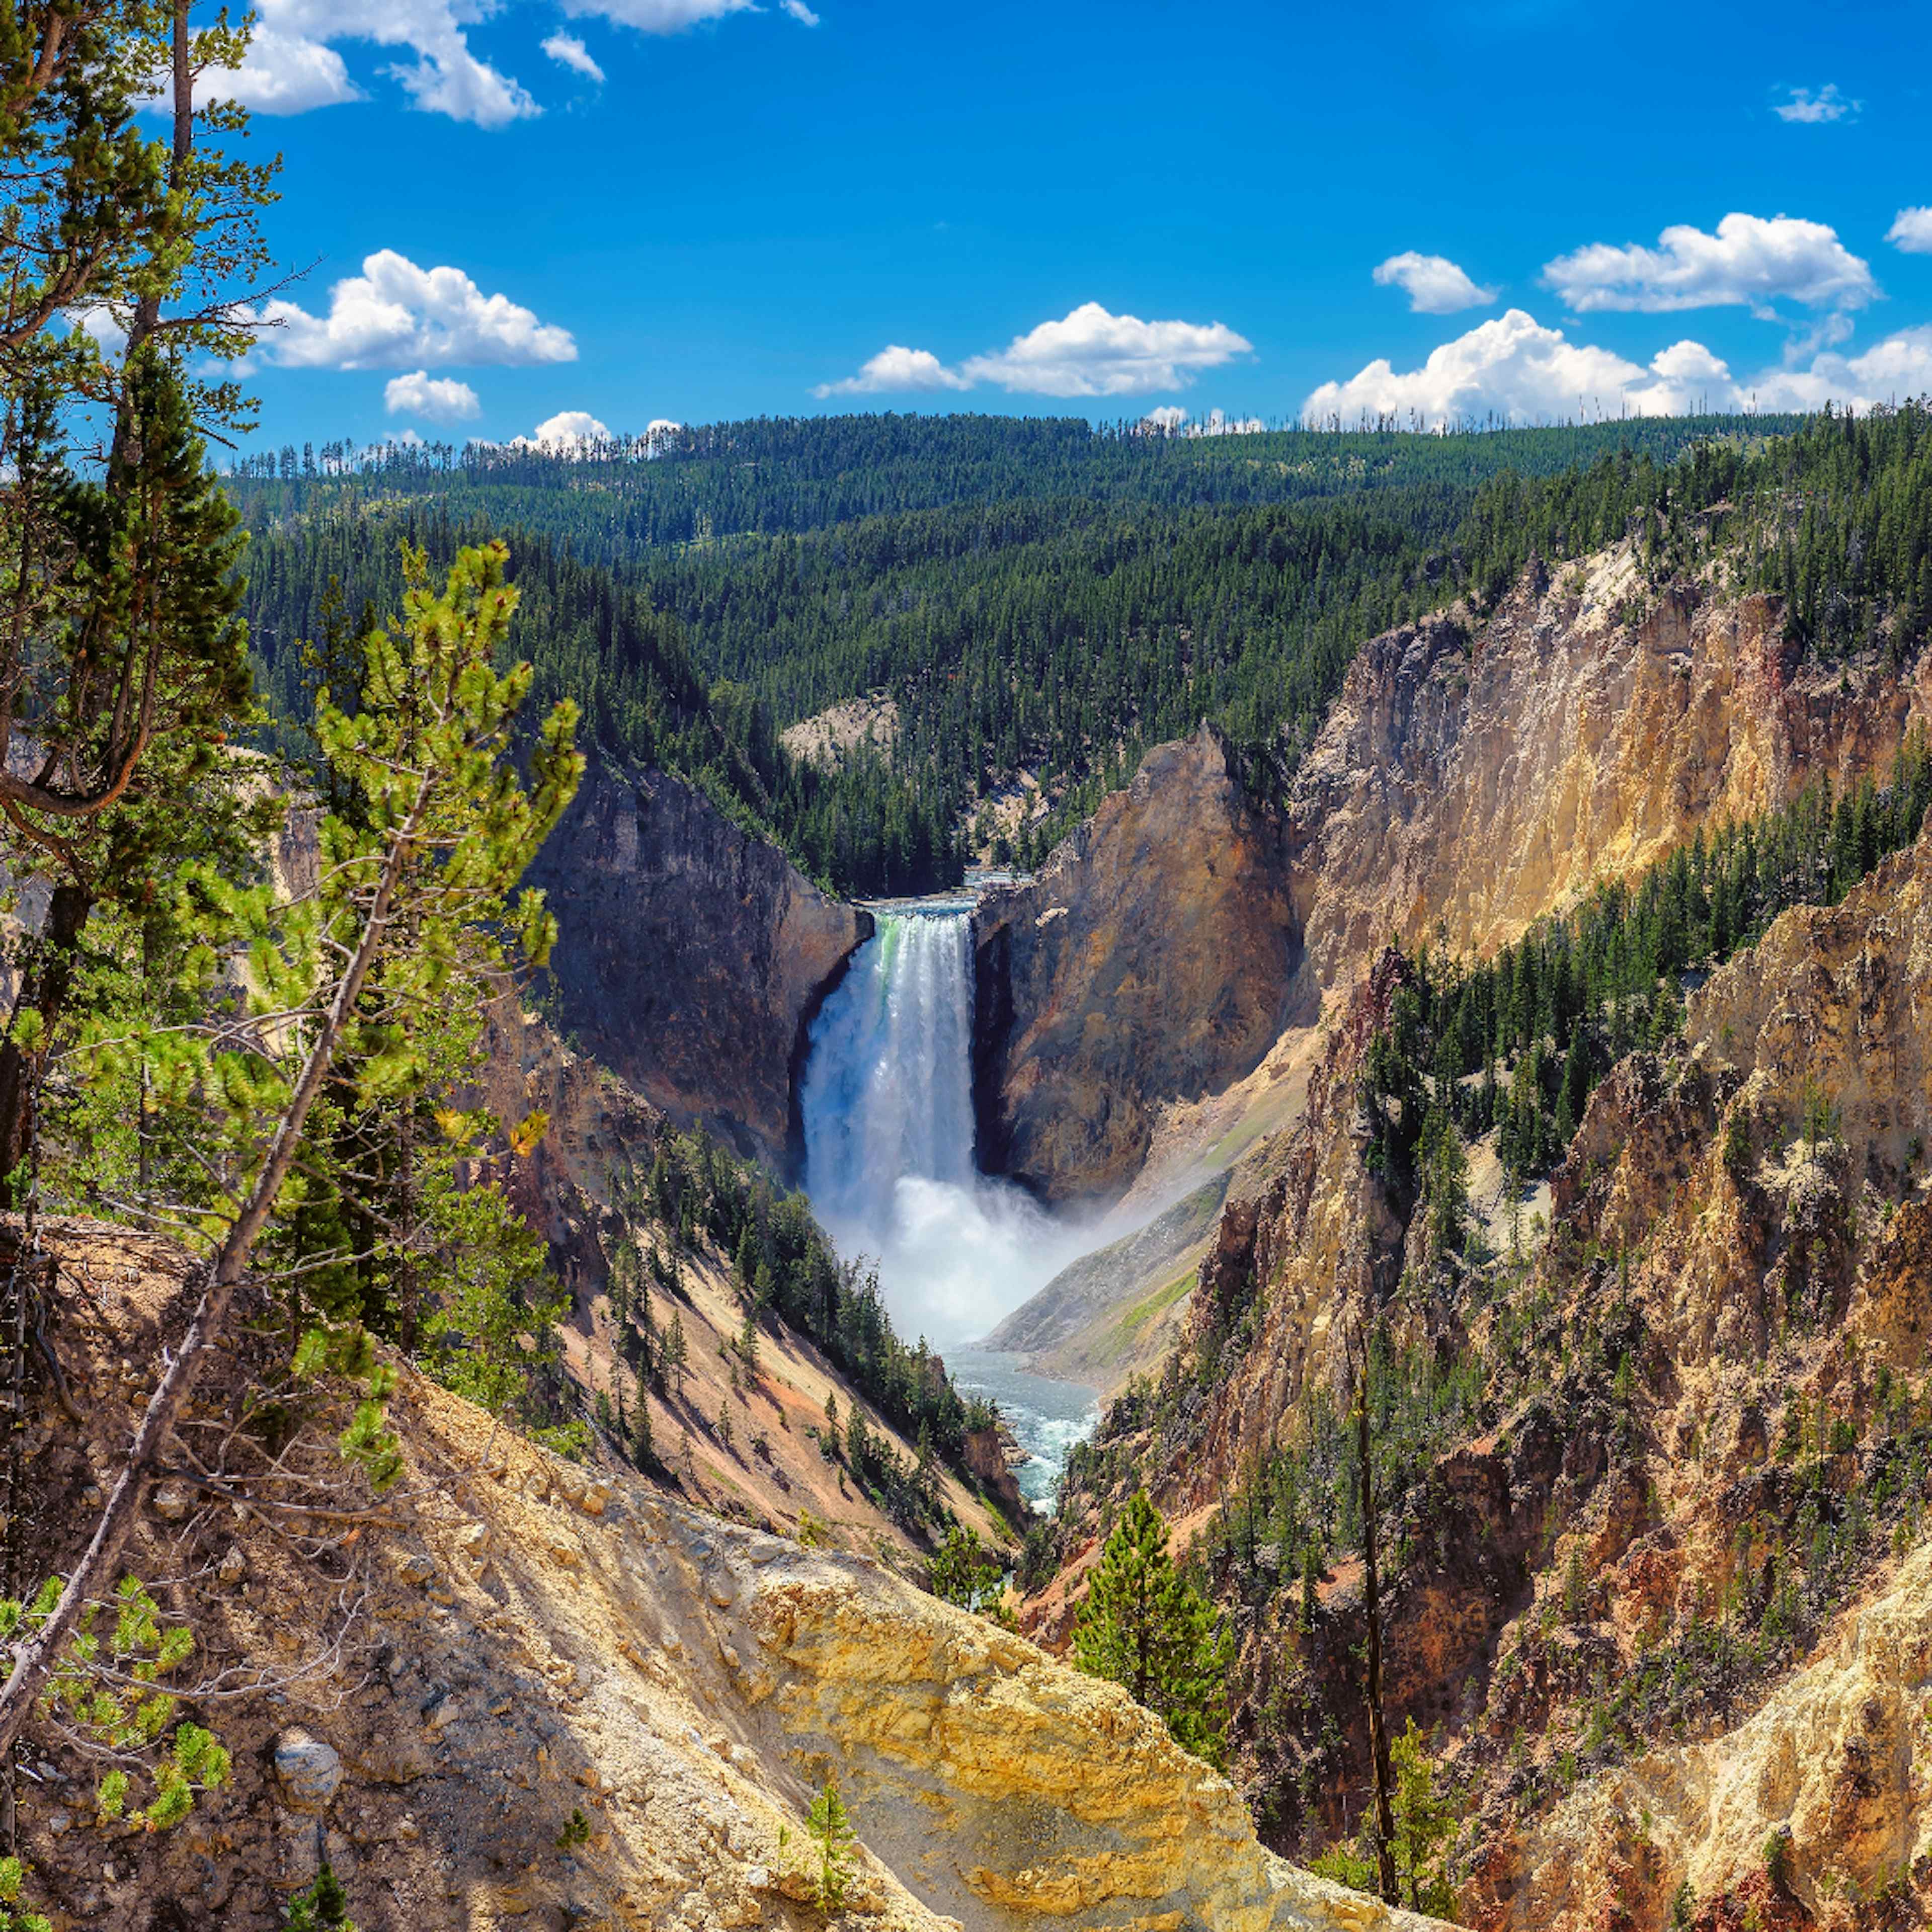 The waterfall in the Grand Canyon of Yellowstone in Yellowstone National Park in Yellowstone Teton Territory.